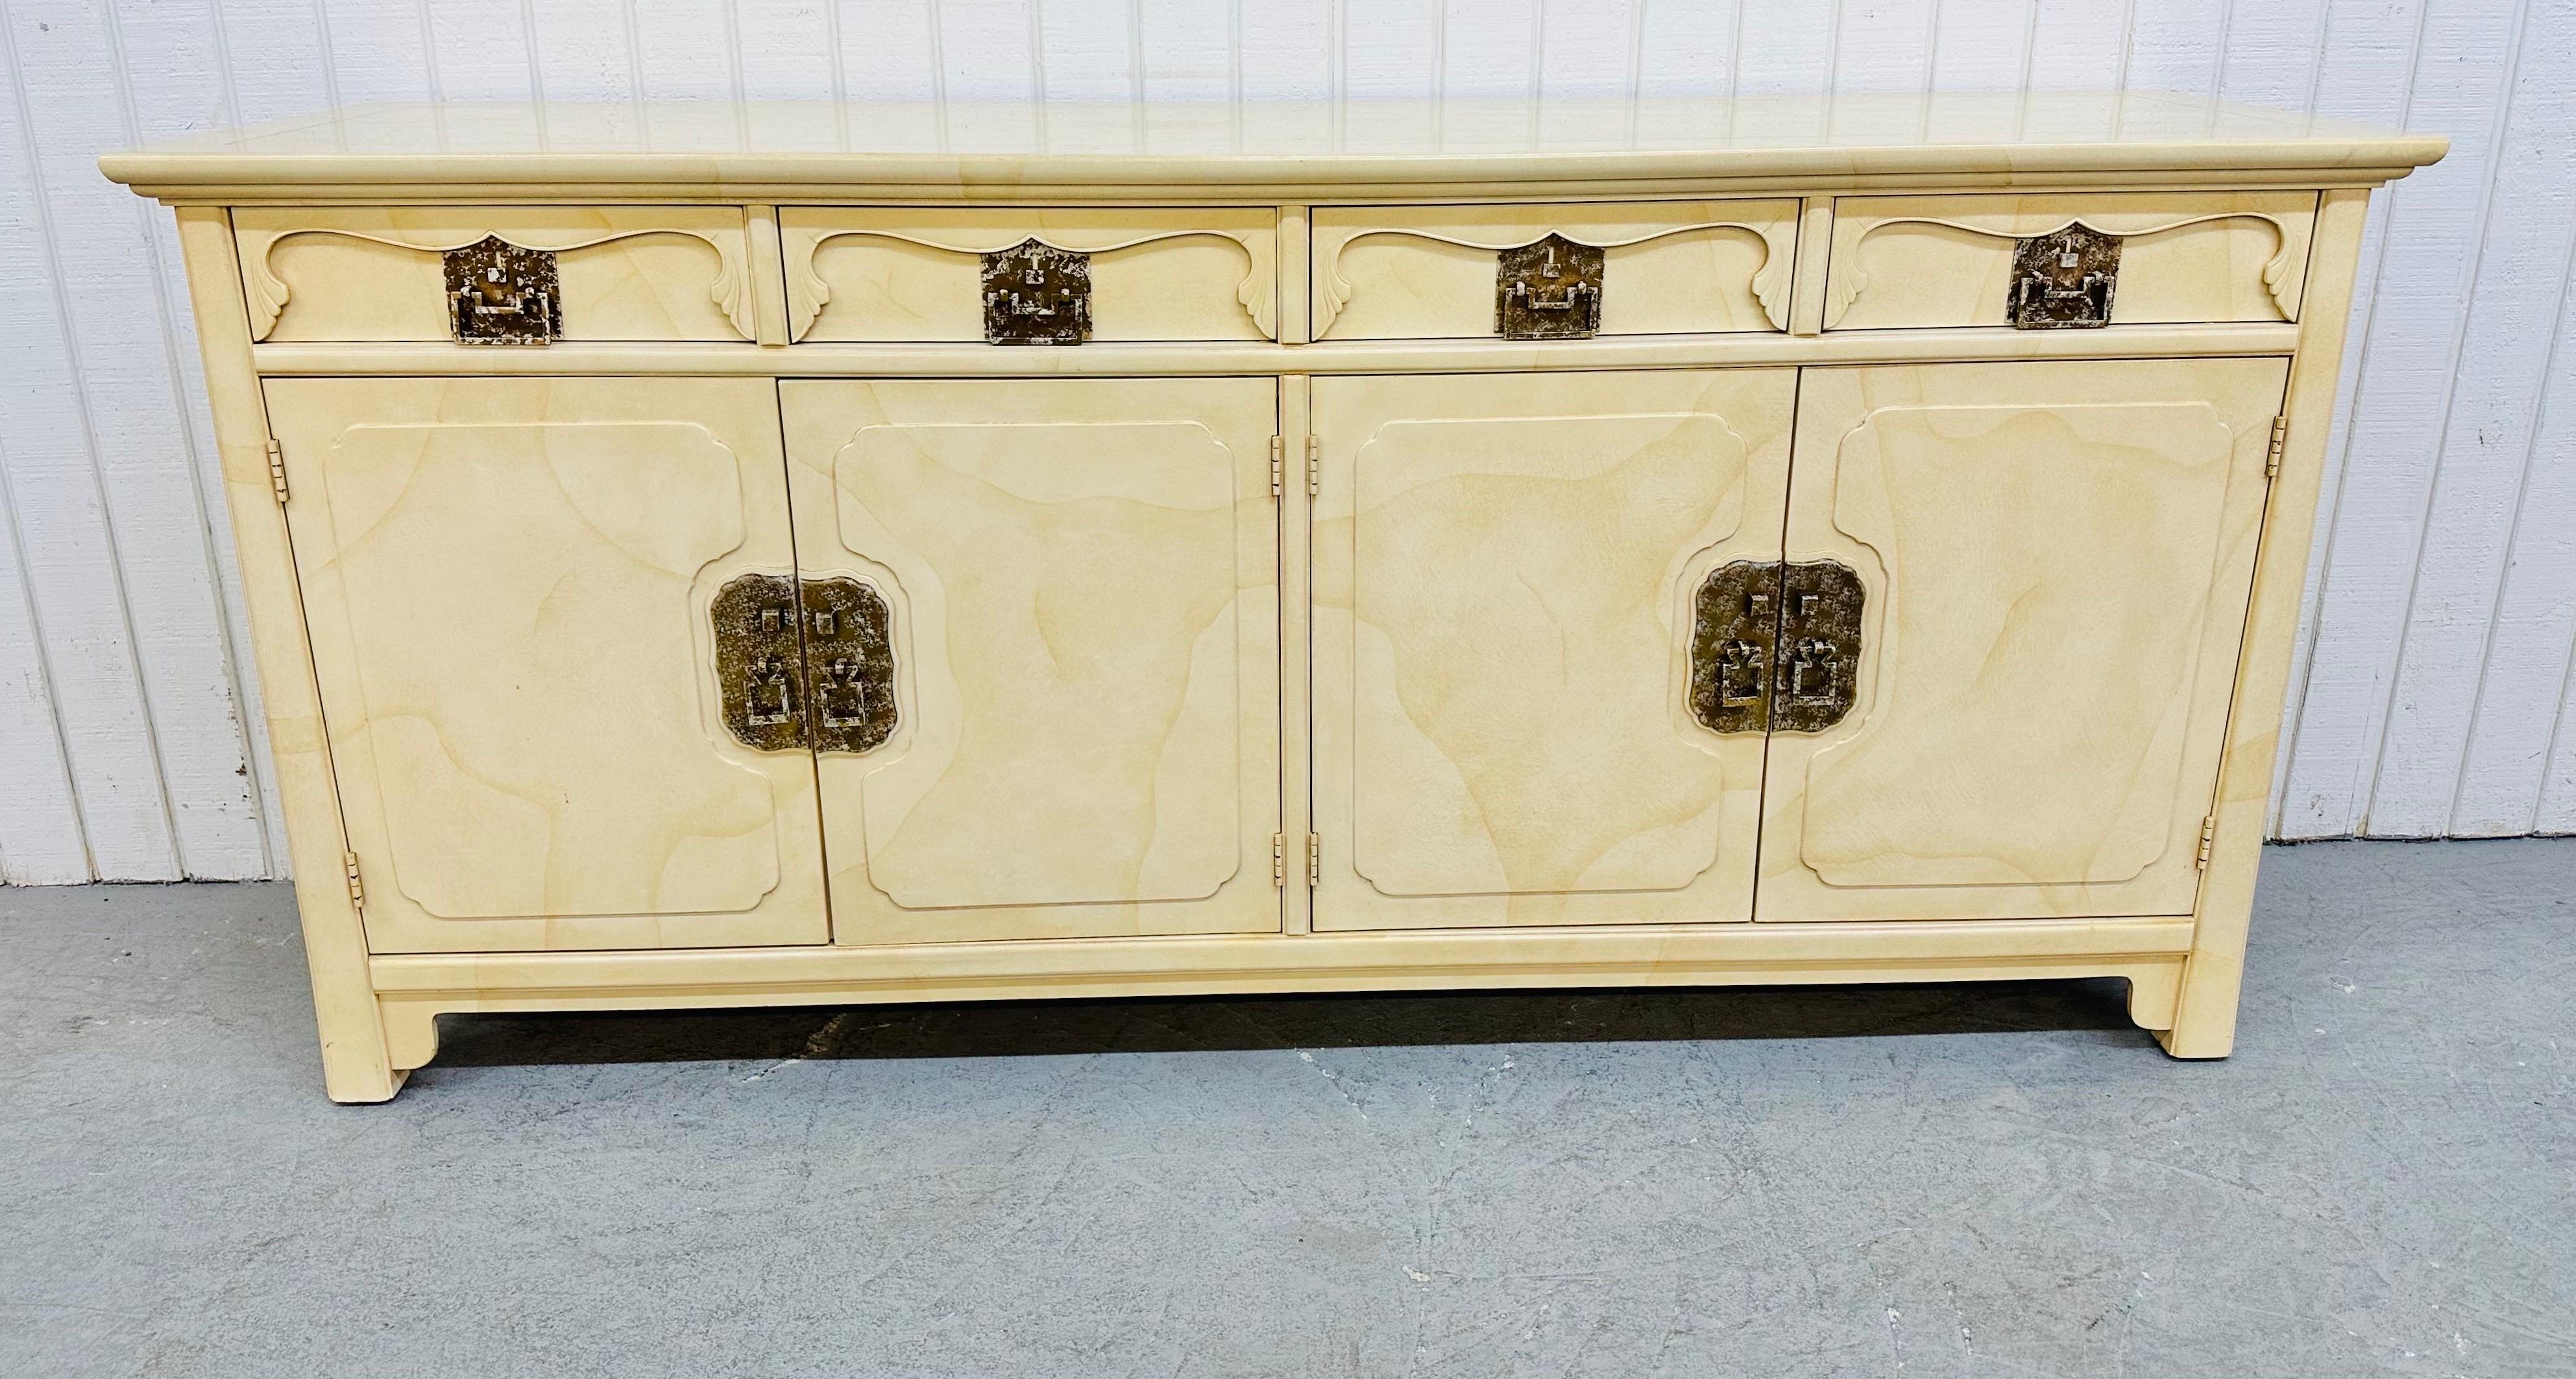 This listing is for a vintage Henredon Ivory Lacquered Sideboard. Featuring an Asian inspired design, four drawers, four doors that open up to storage space, original brass hardware, and a beautiful lacquered ivory finish.